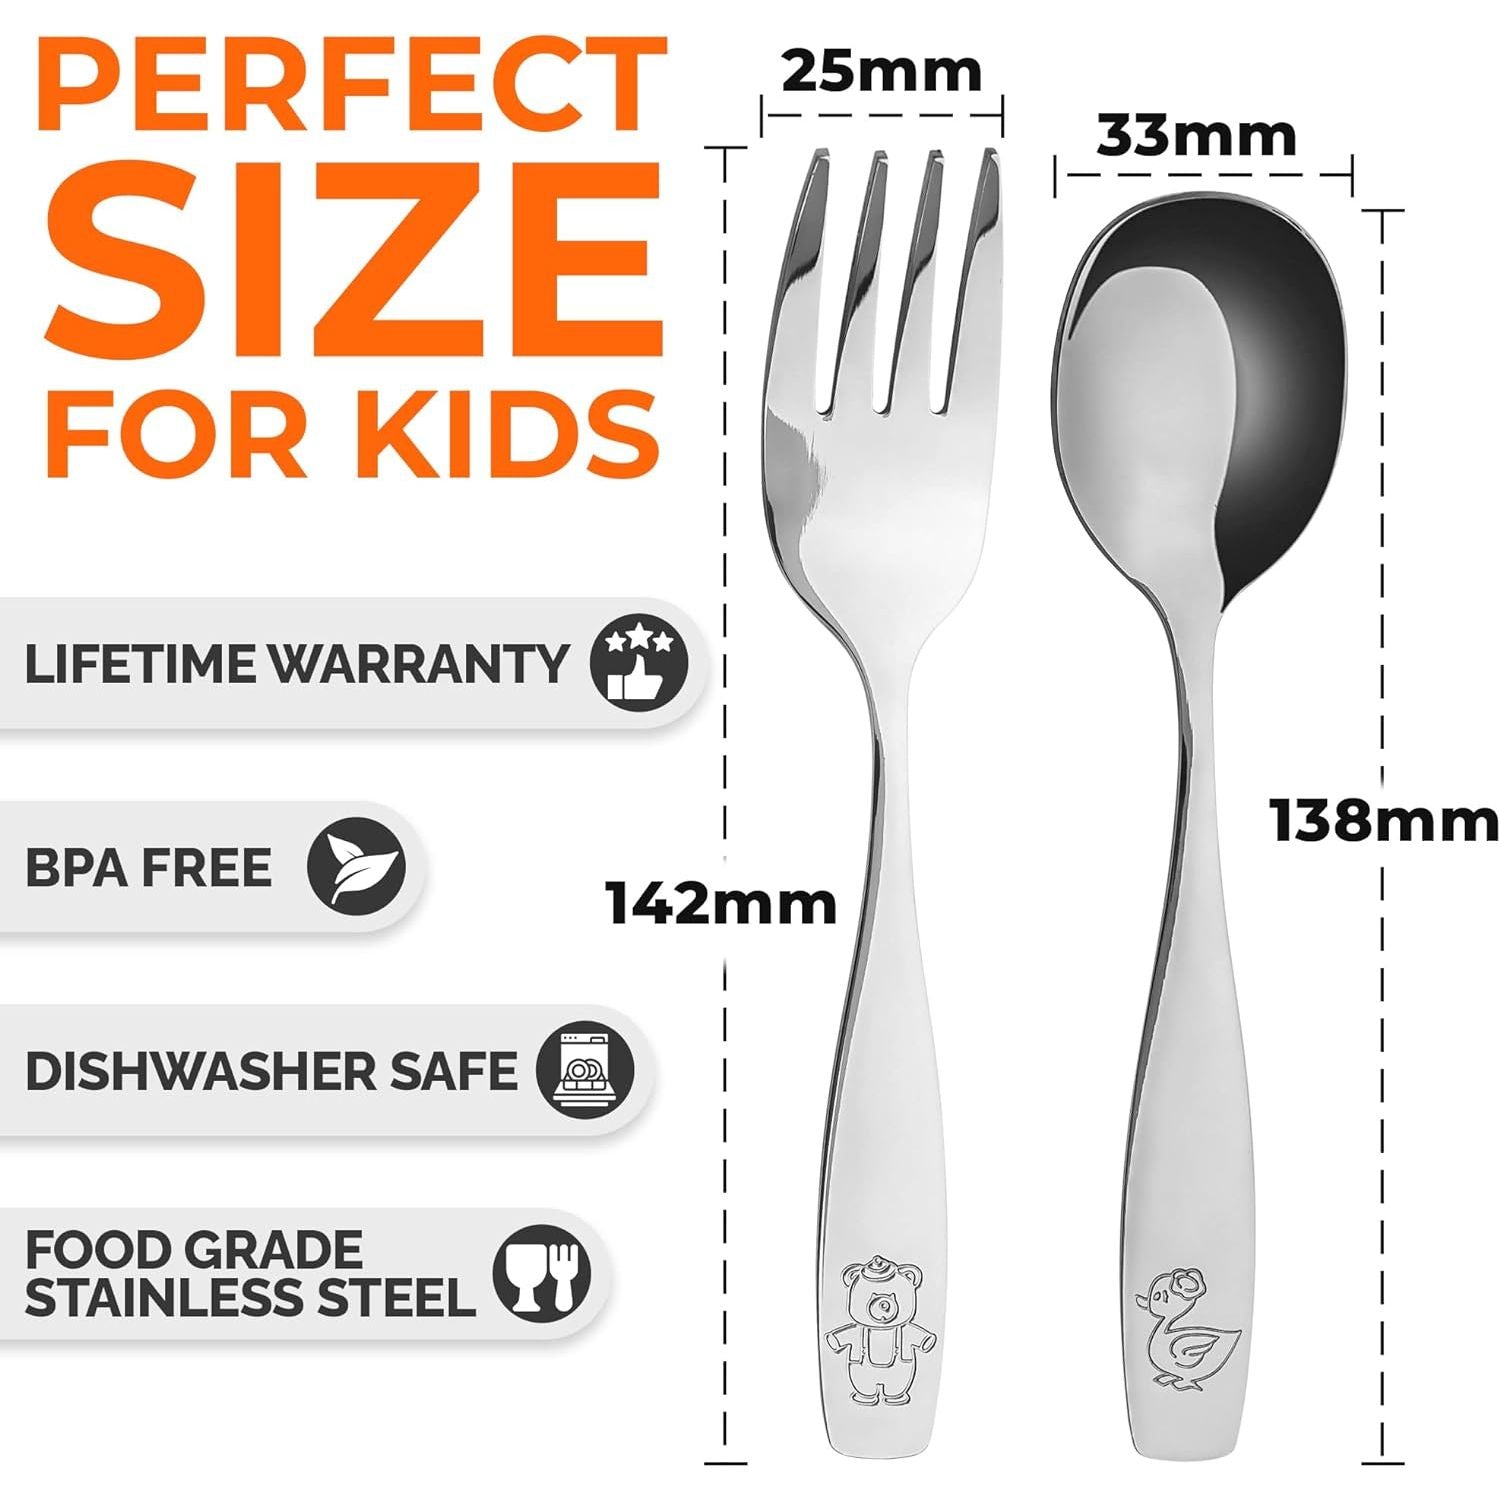 Electric Spoon – KitchenShuttle